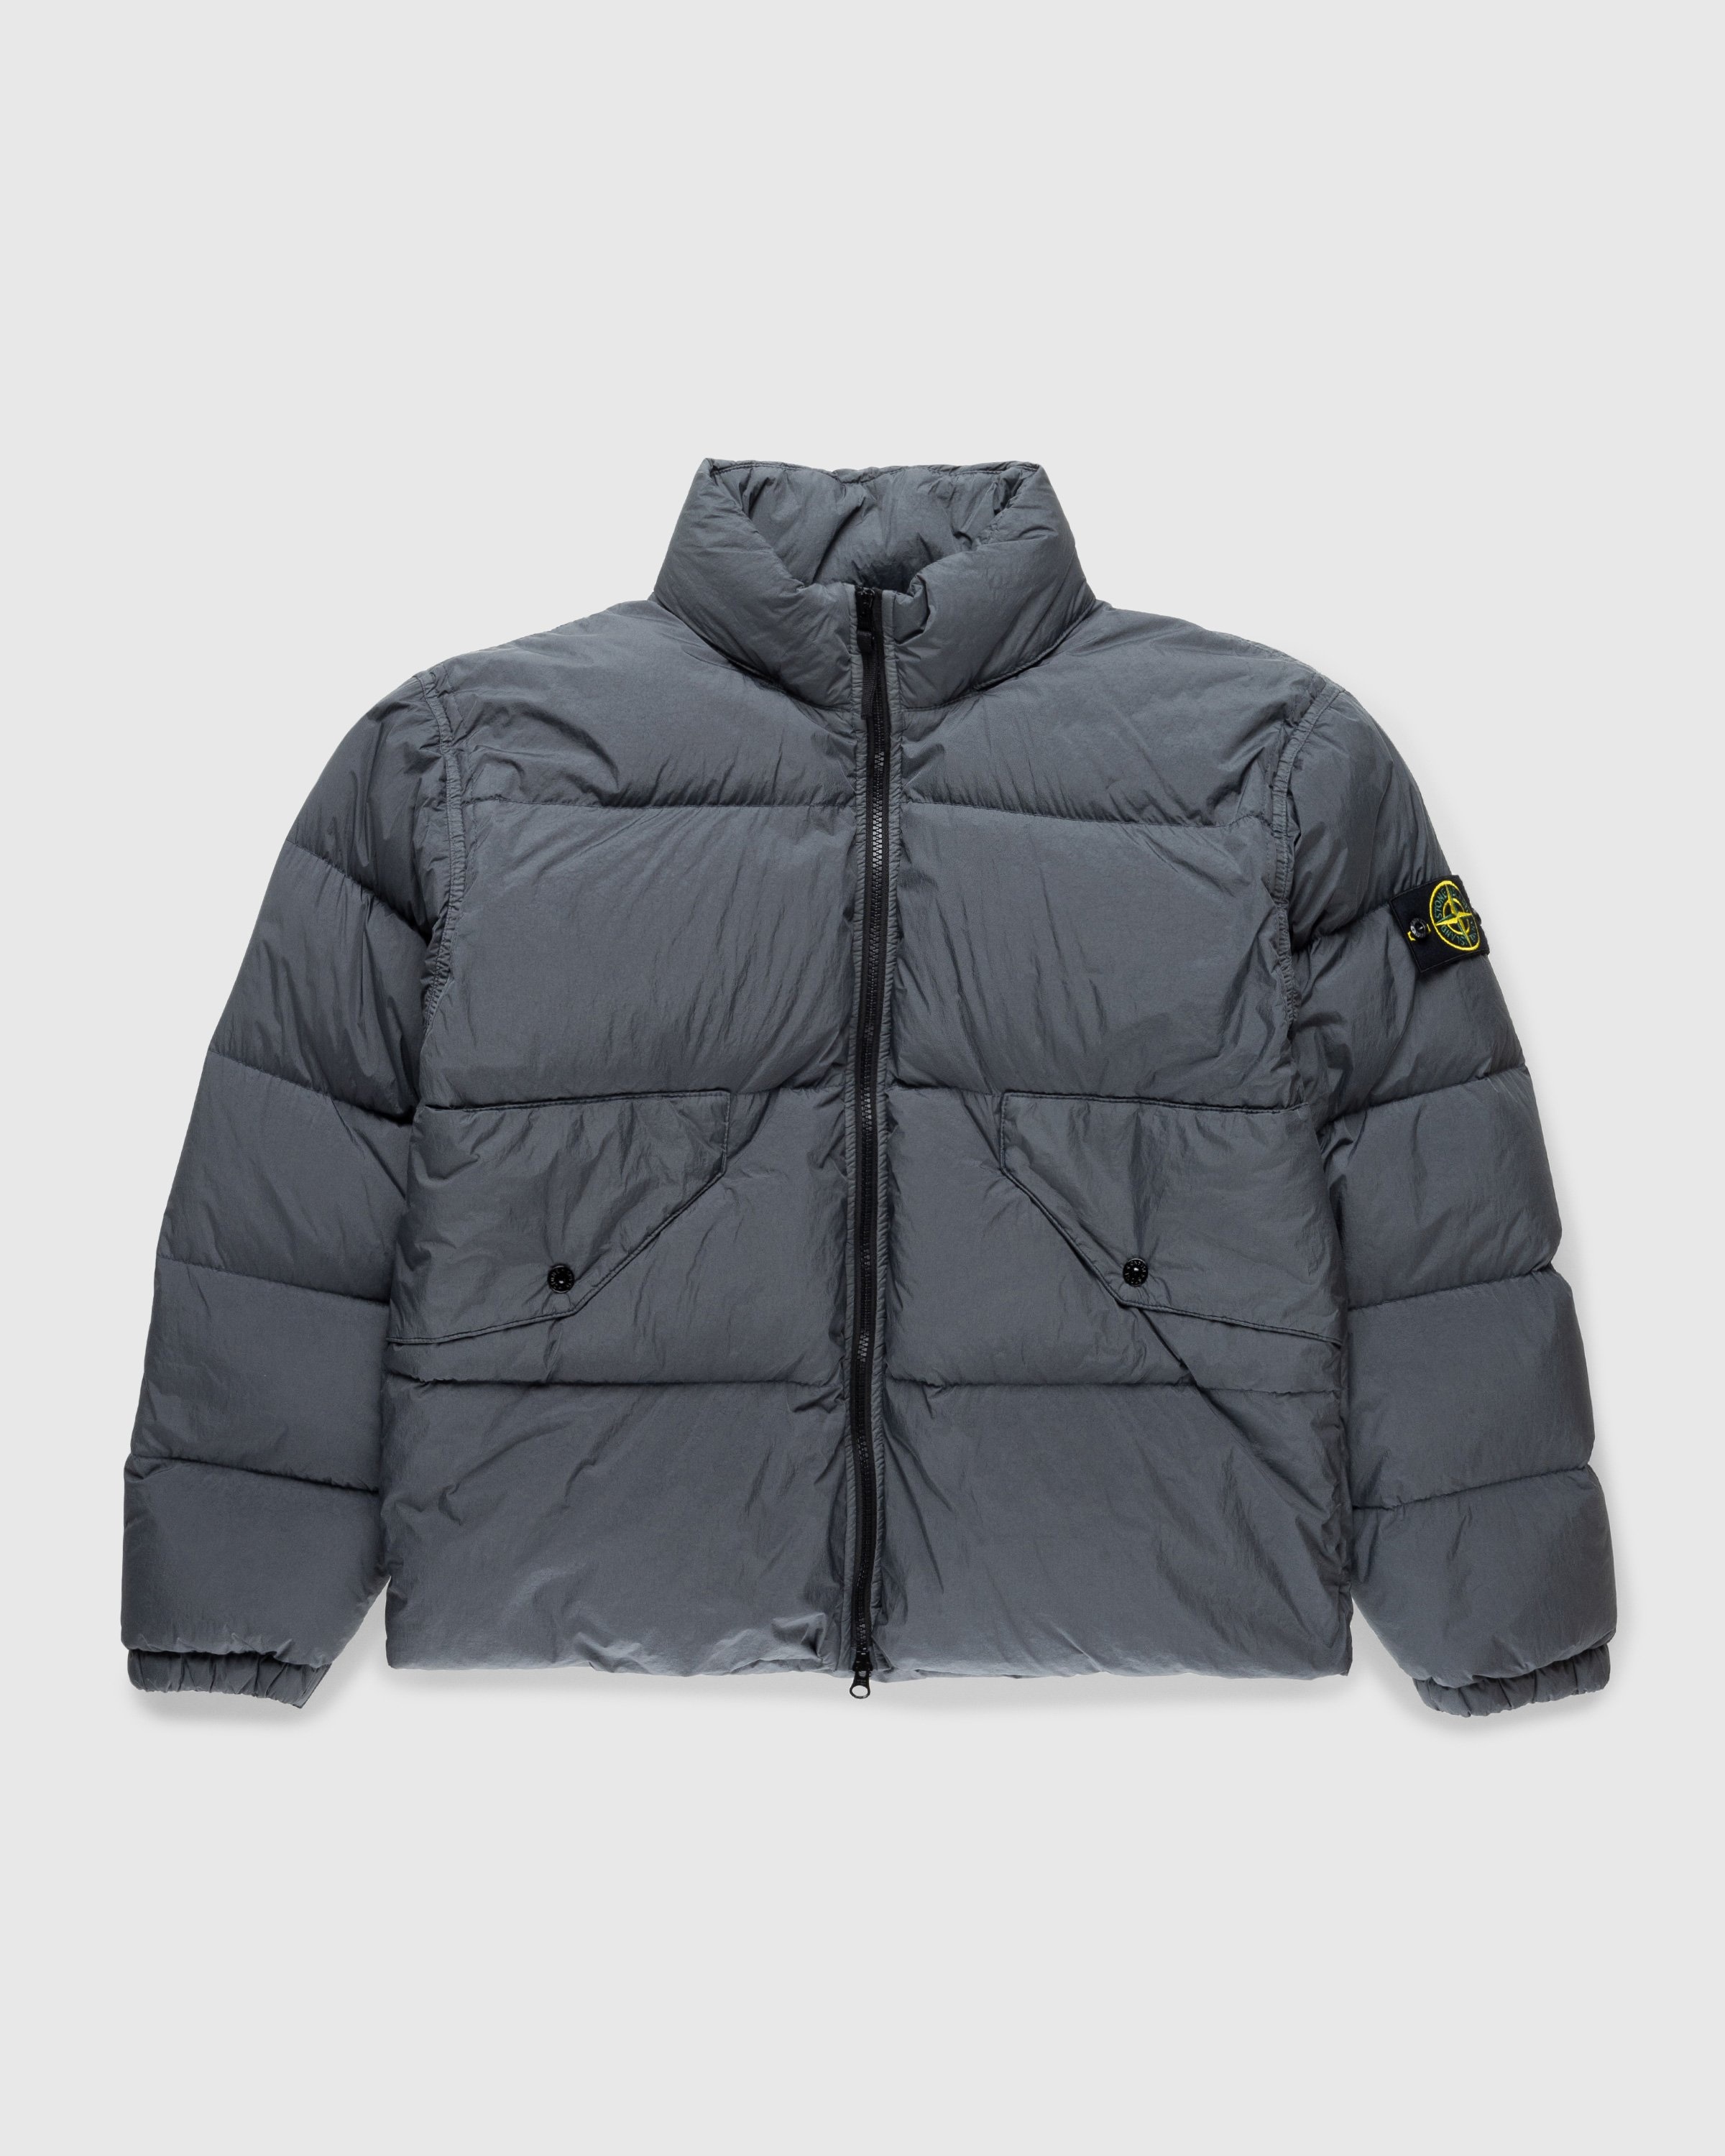 Stone Island – Garment-Dyed Recycled Nylon Down Jacket Lead Grey - Outerwear - Grey - Image 1